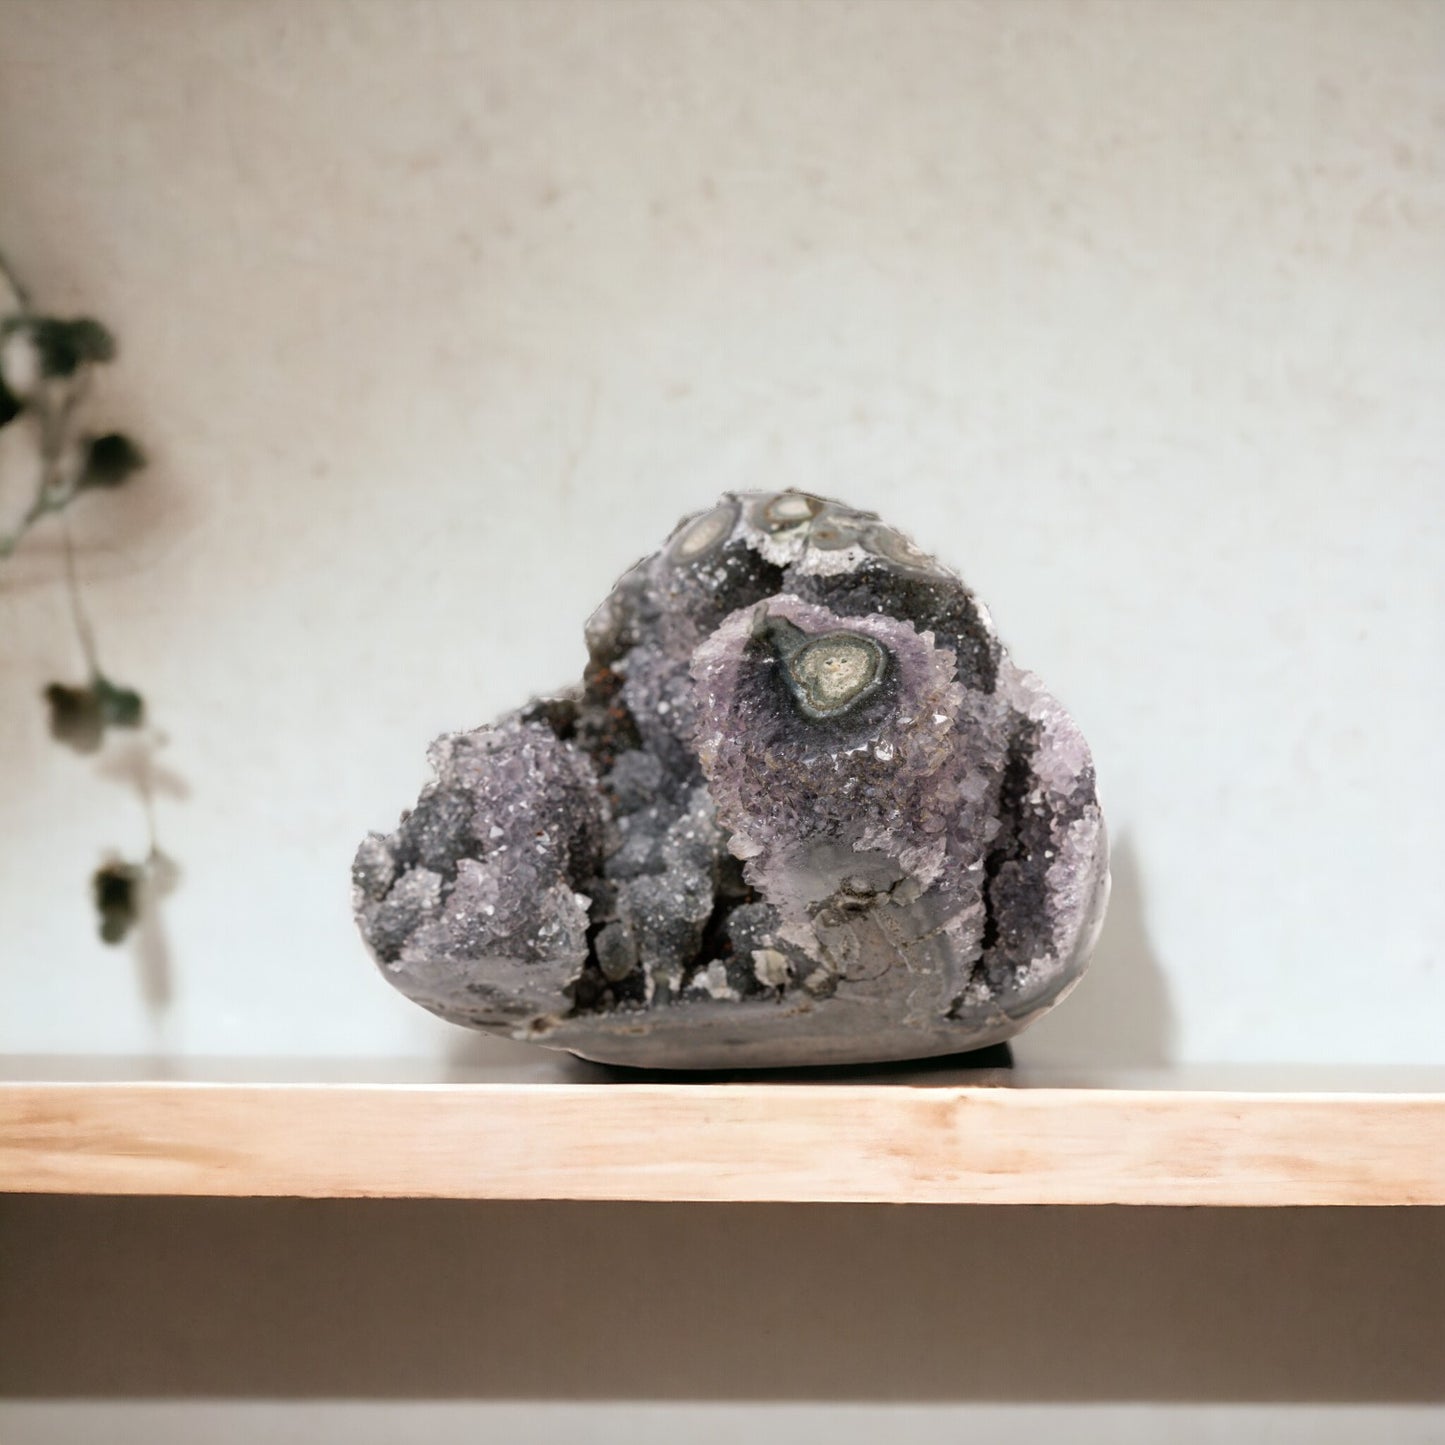 Raw AAA+ Amethyst Crystal Geode – 0.76 lbs, 3.5x2.5x2.5 in Exclusive and Rare Rock from Uruguay